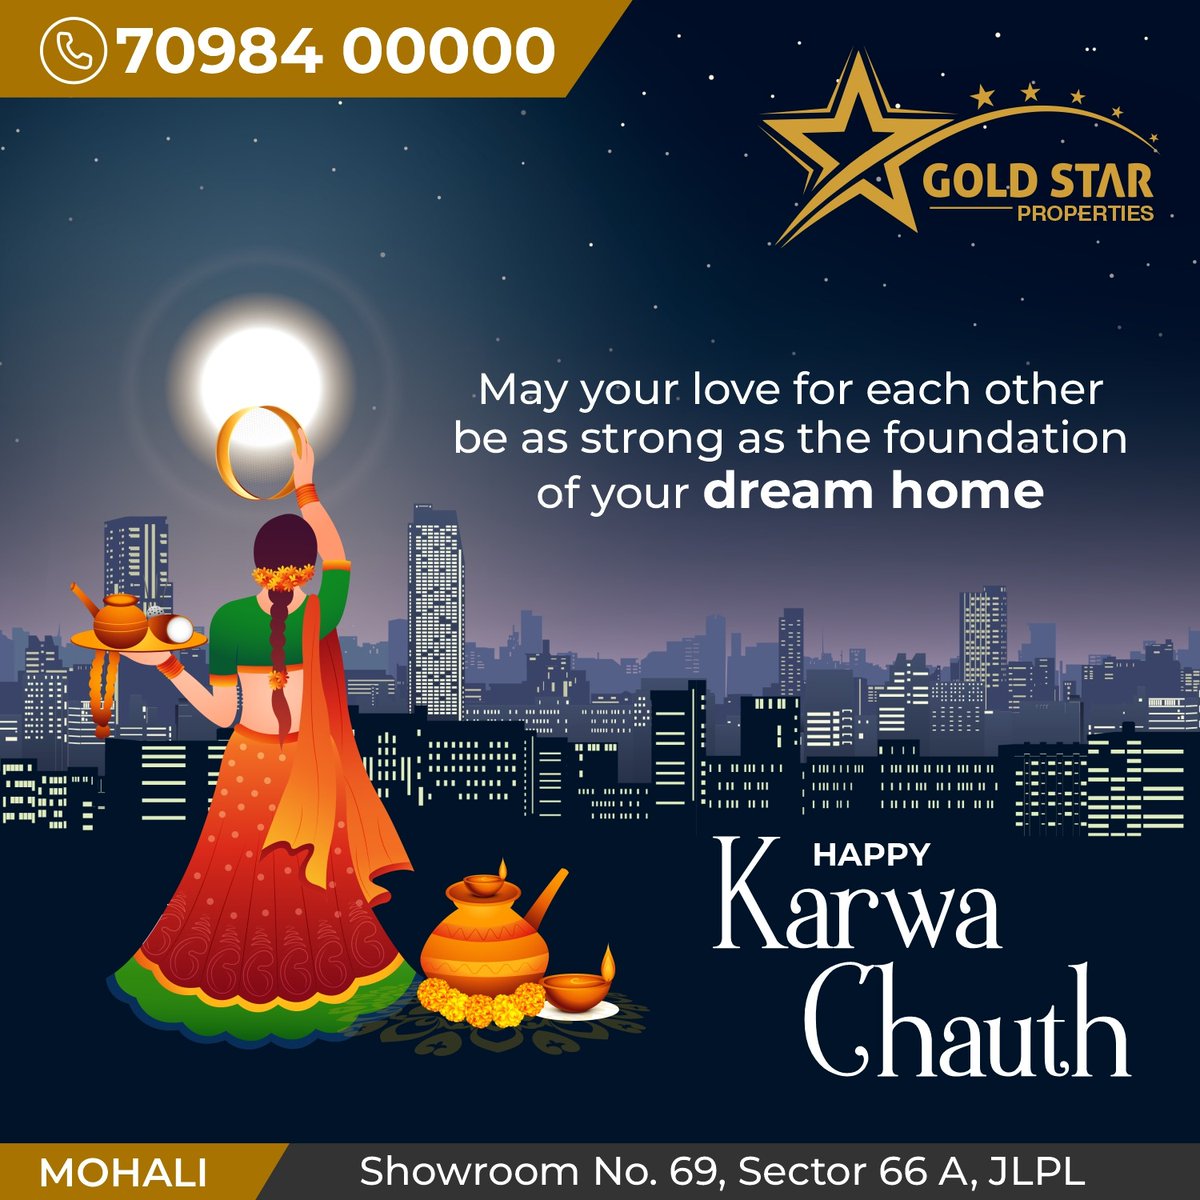 Happy Karwa Chauth
May your love for each other be as strong as the foundation of your dream home.
#dreamhome #stronglove #foundation #karwachauth #goldstarproperties